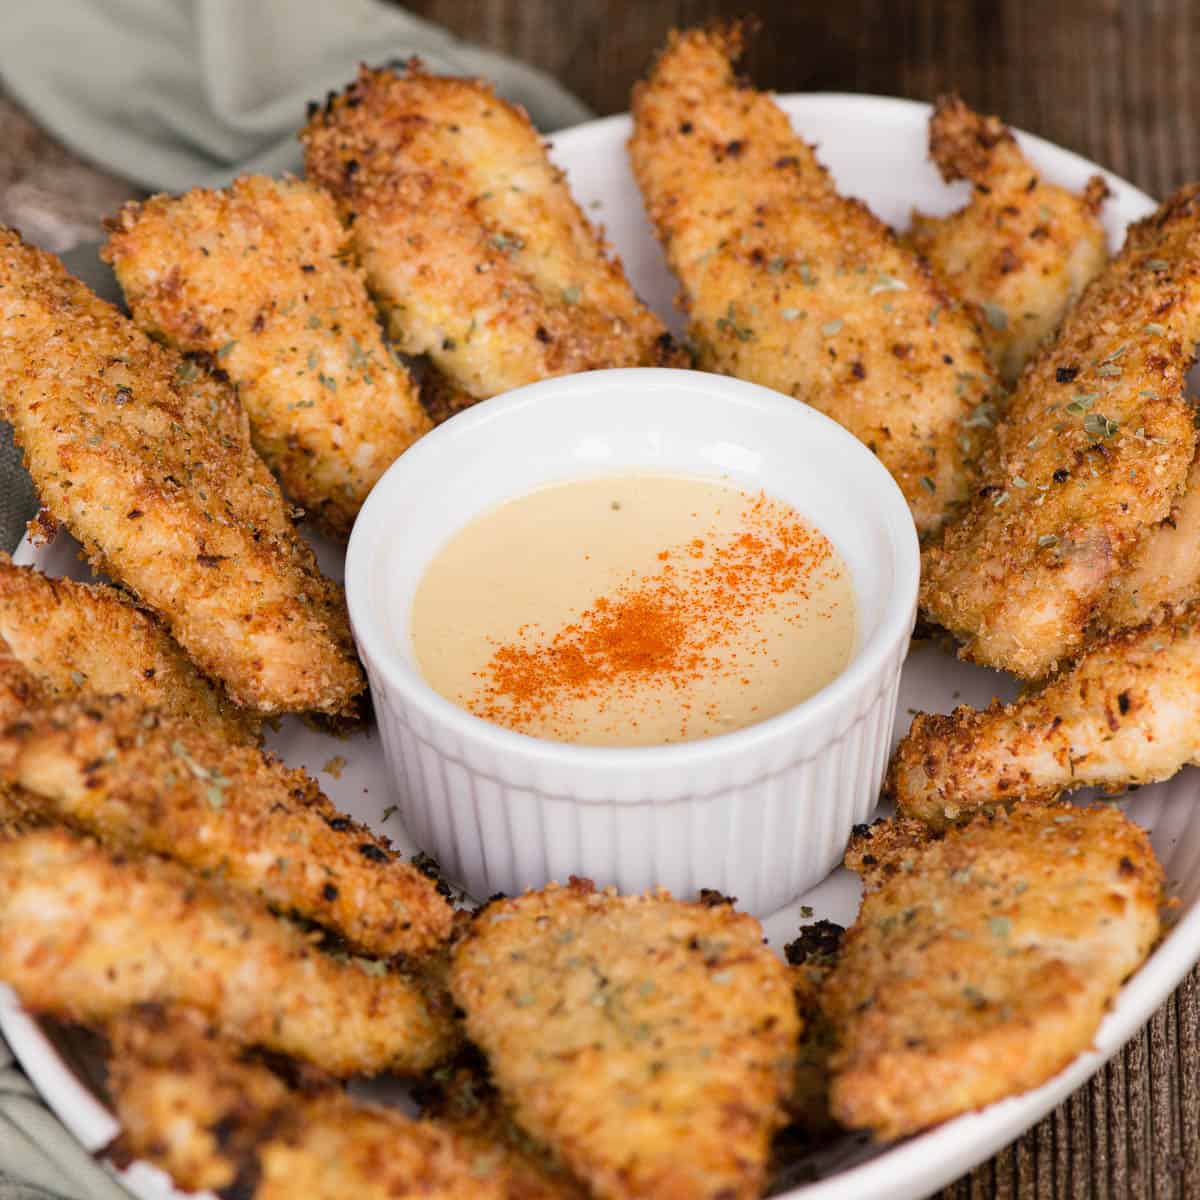 https://selfproclaimedfoodie.com/wp-content/uploads/air-fryer-chicken-tenders-square-2.jpg